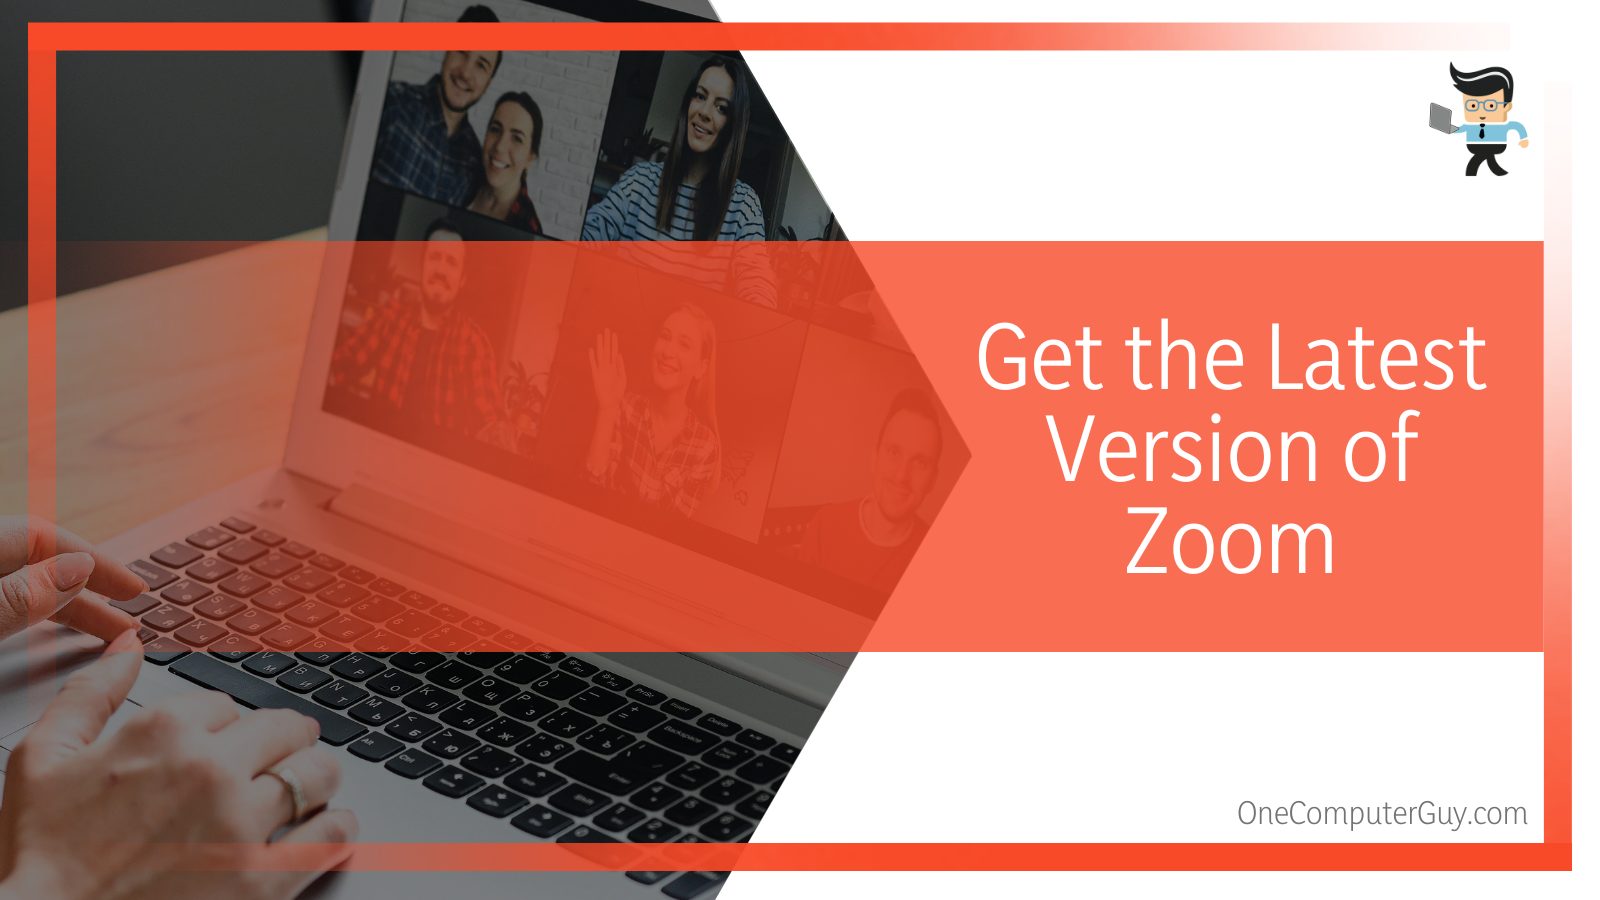 Get the Latest Version of Zoom